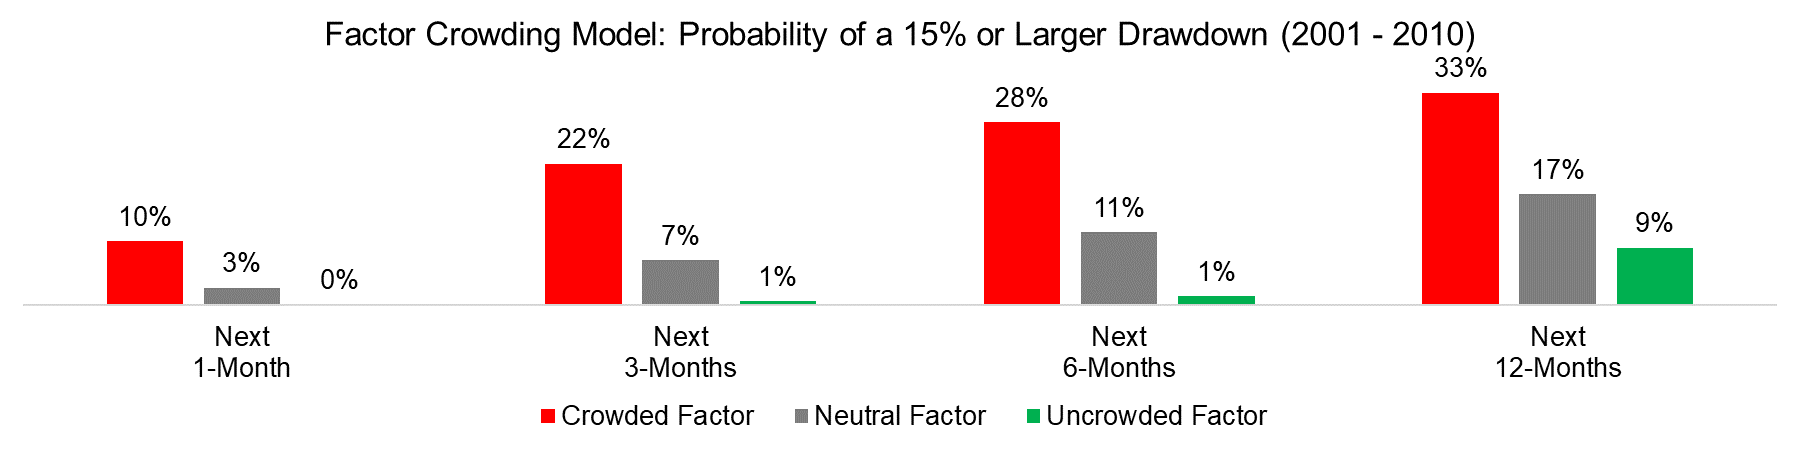 Factor Crowding Model Probability of a 15% or Larger Drawdown (200